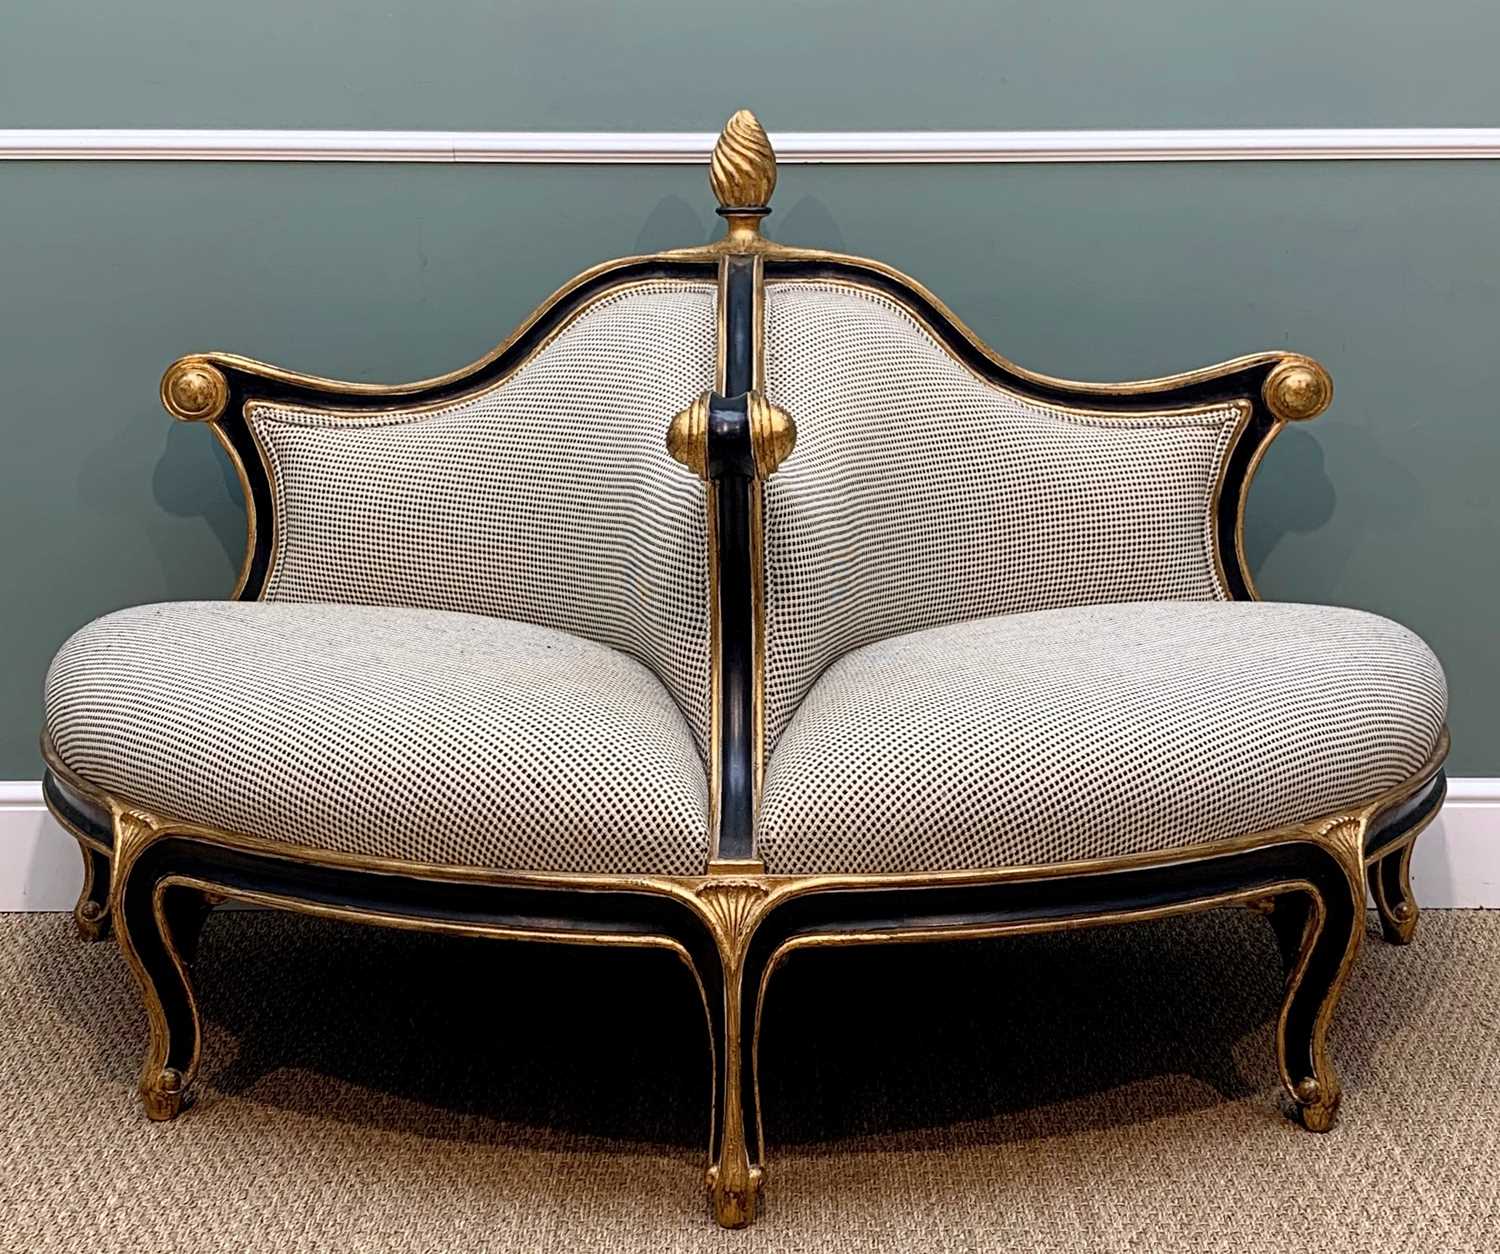 CHRISTOPHER GUY DOUBLE CONVERSATION SOFA, with ebonised & gilt detail, 165 cm long